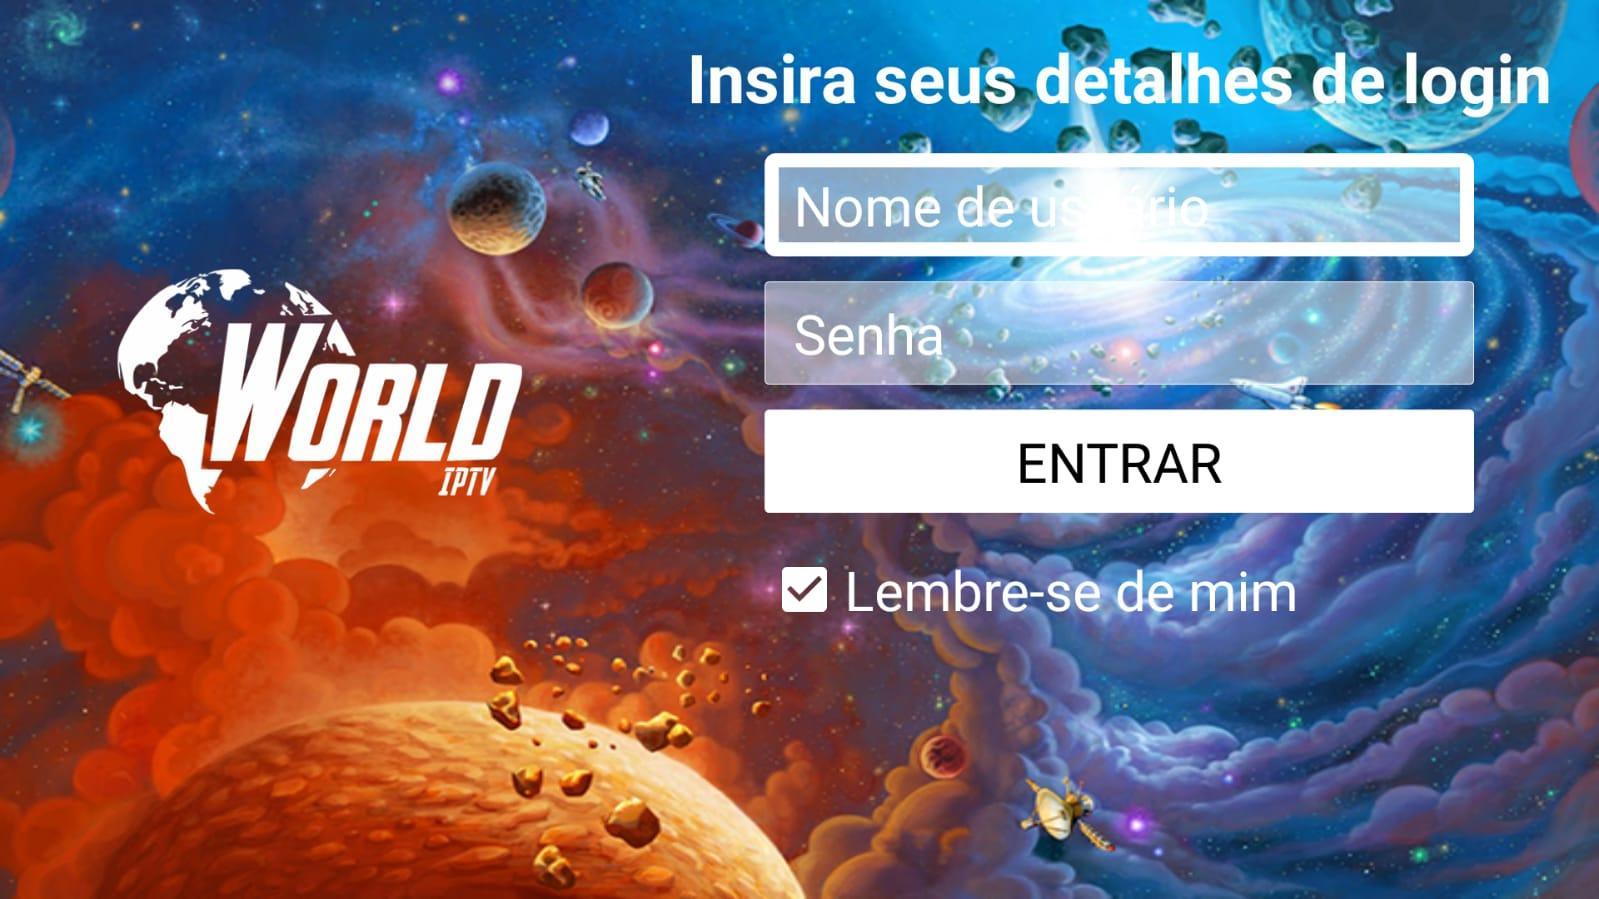 World Box for Android - APK Download